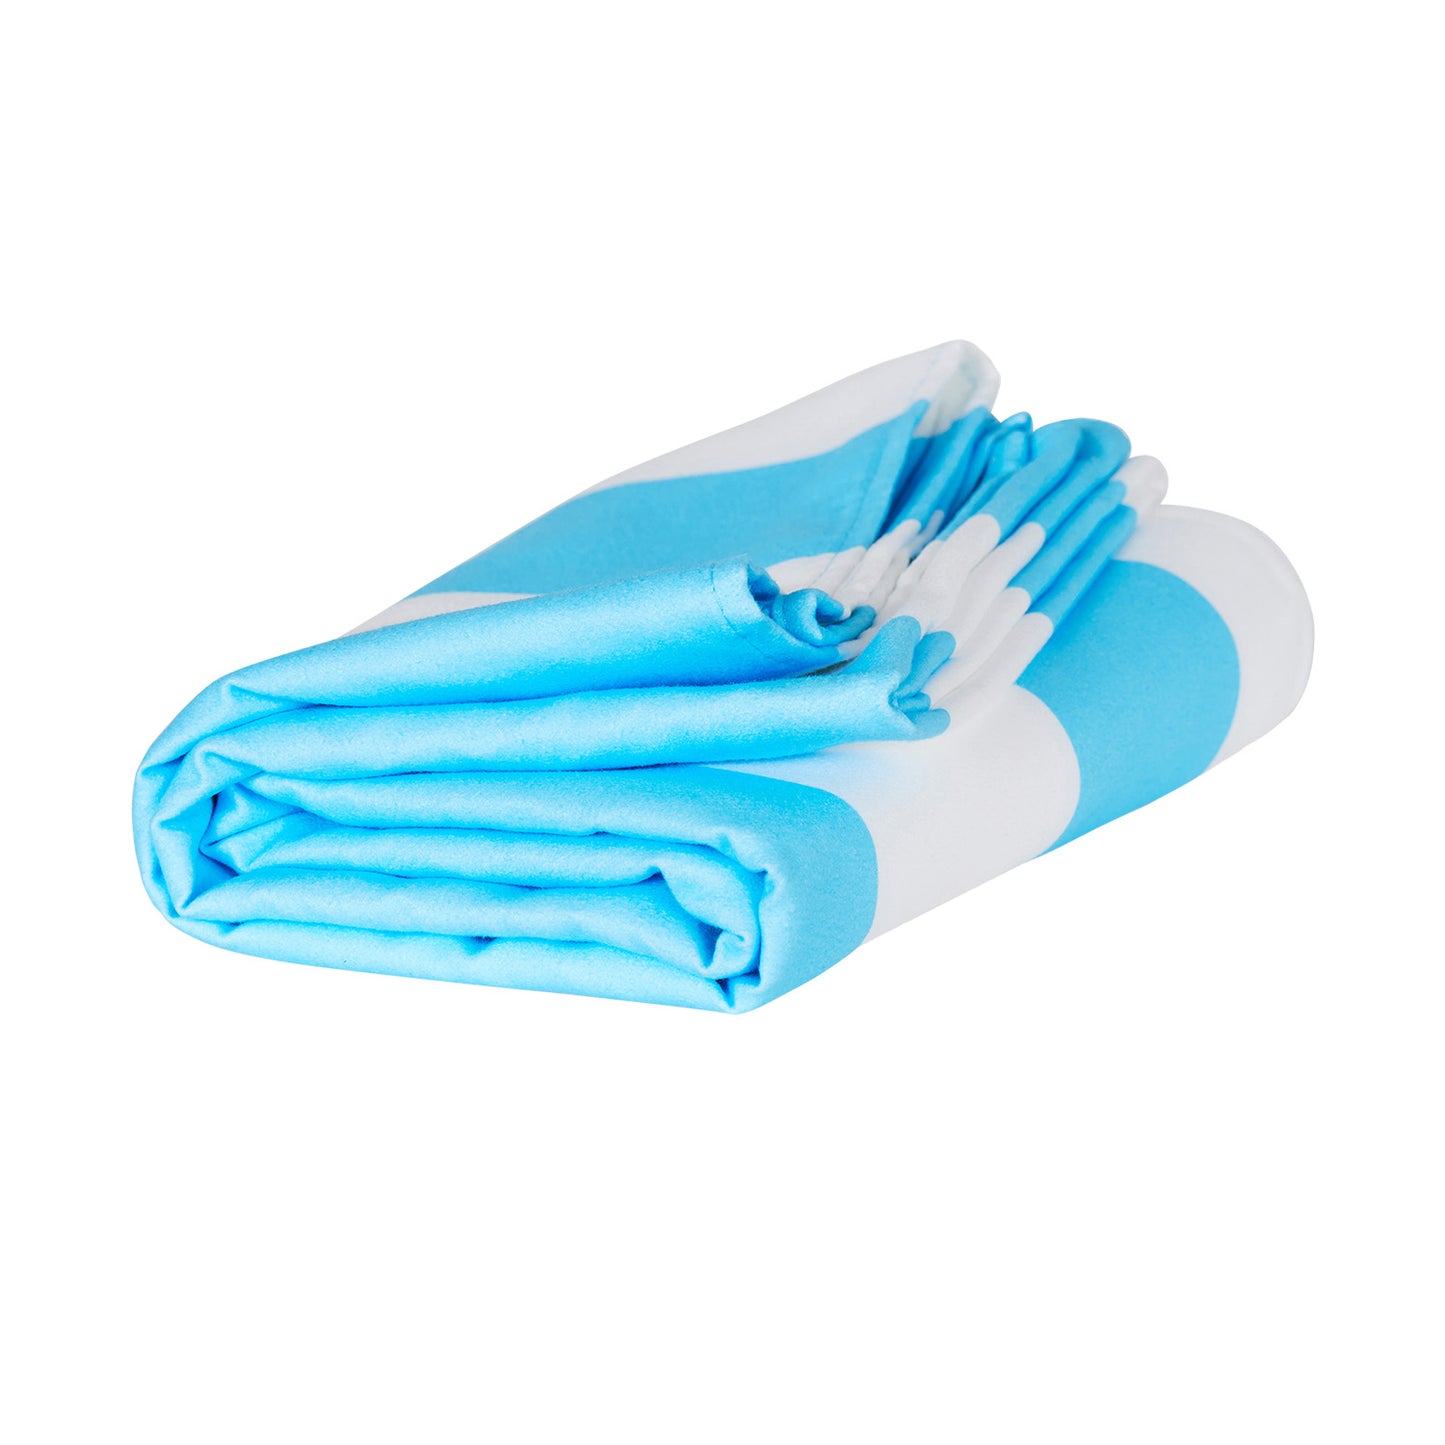 Large Quick Dry Beach Towel - Tulum Blue from Home and Bay folded